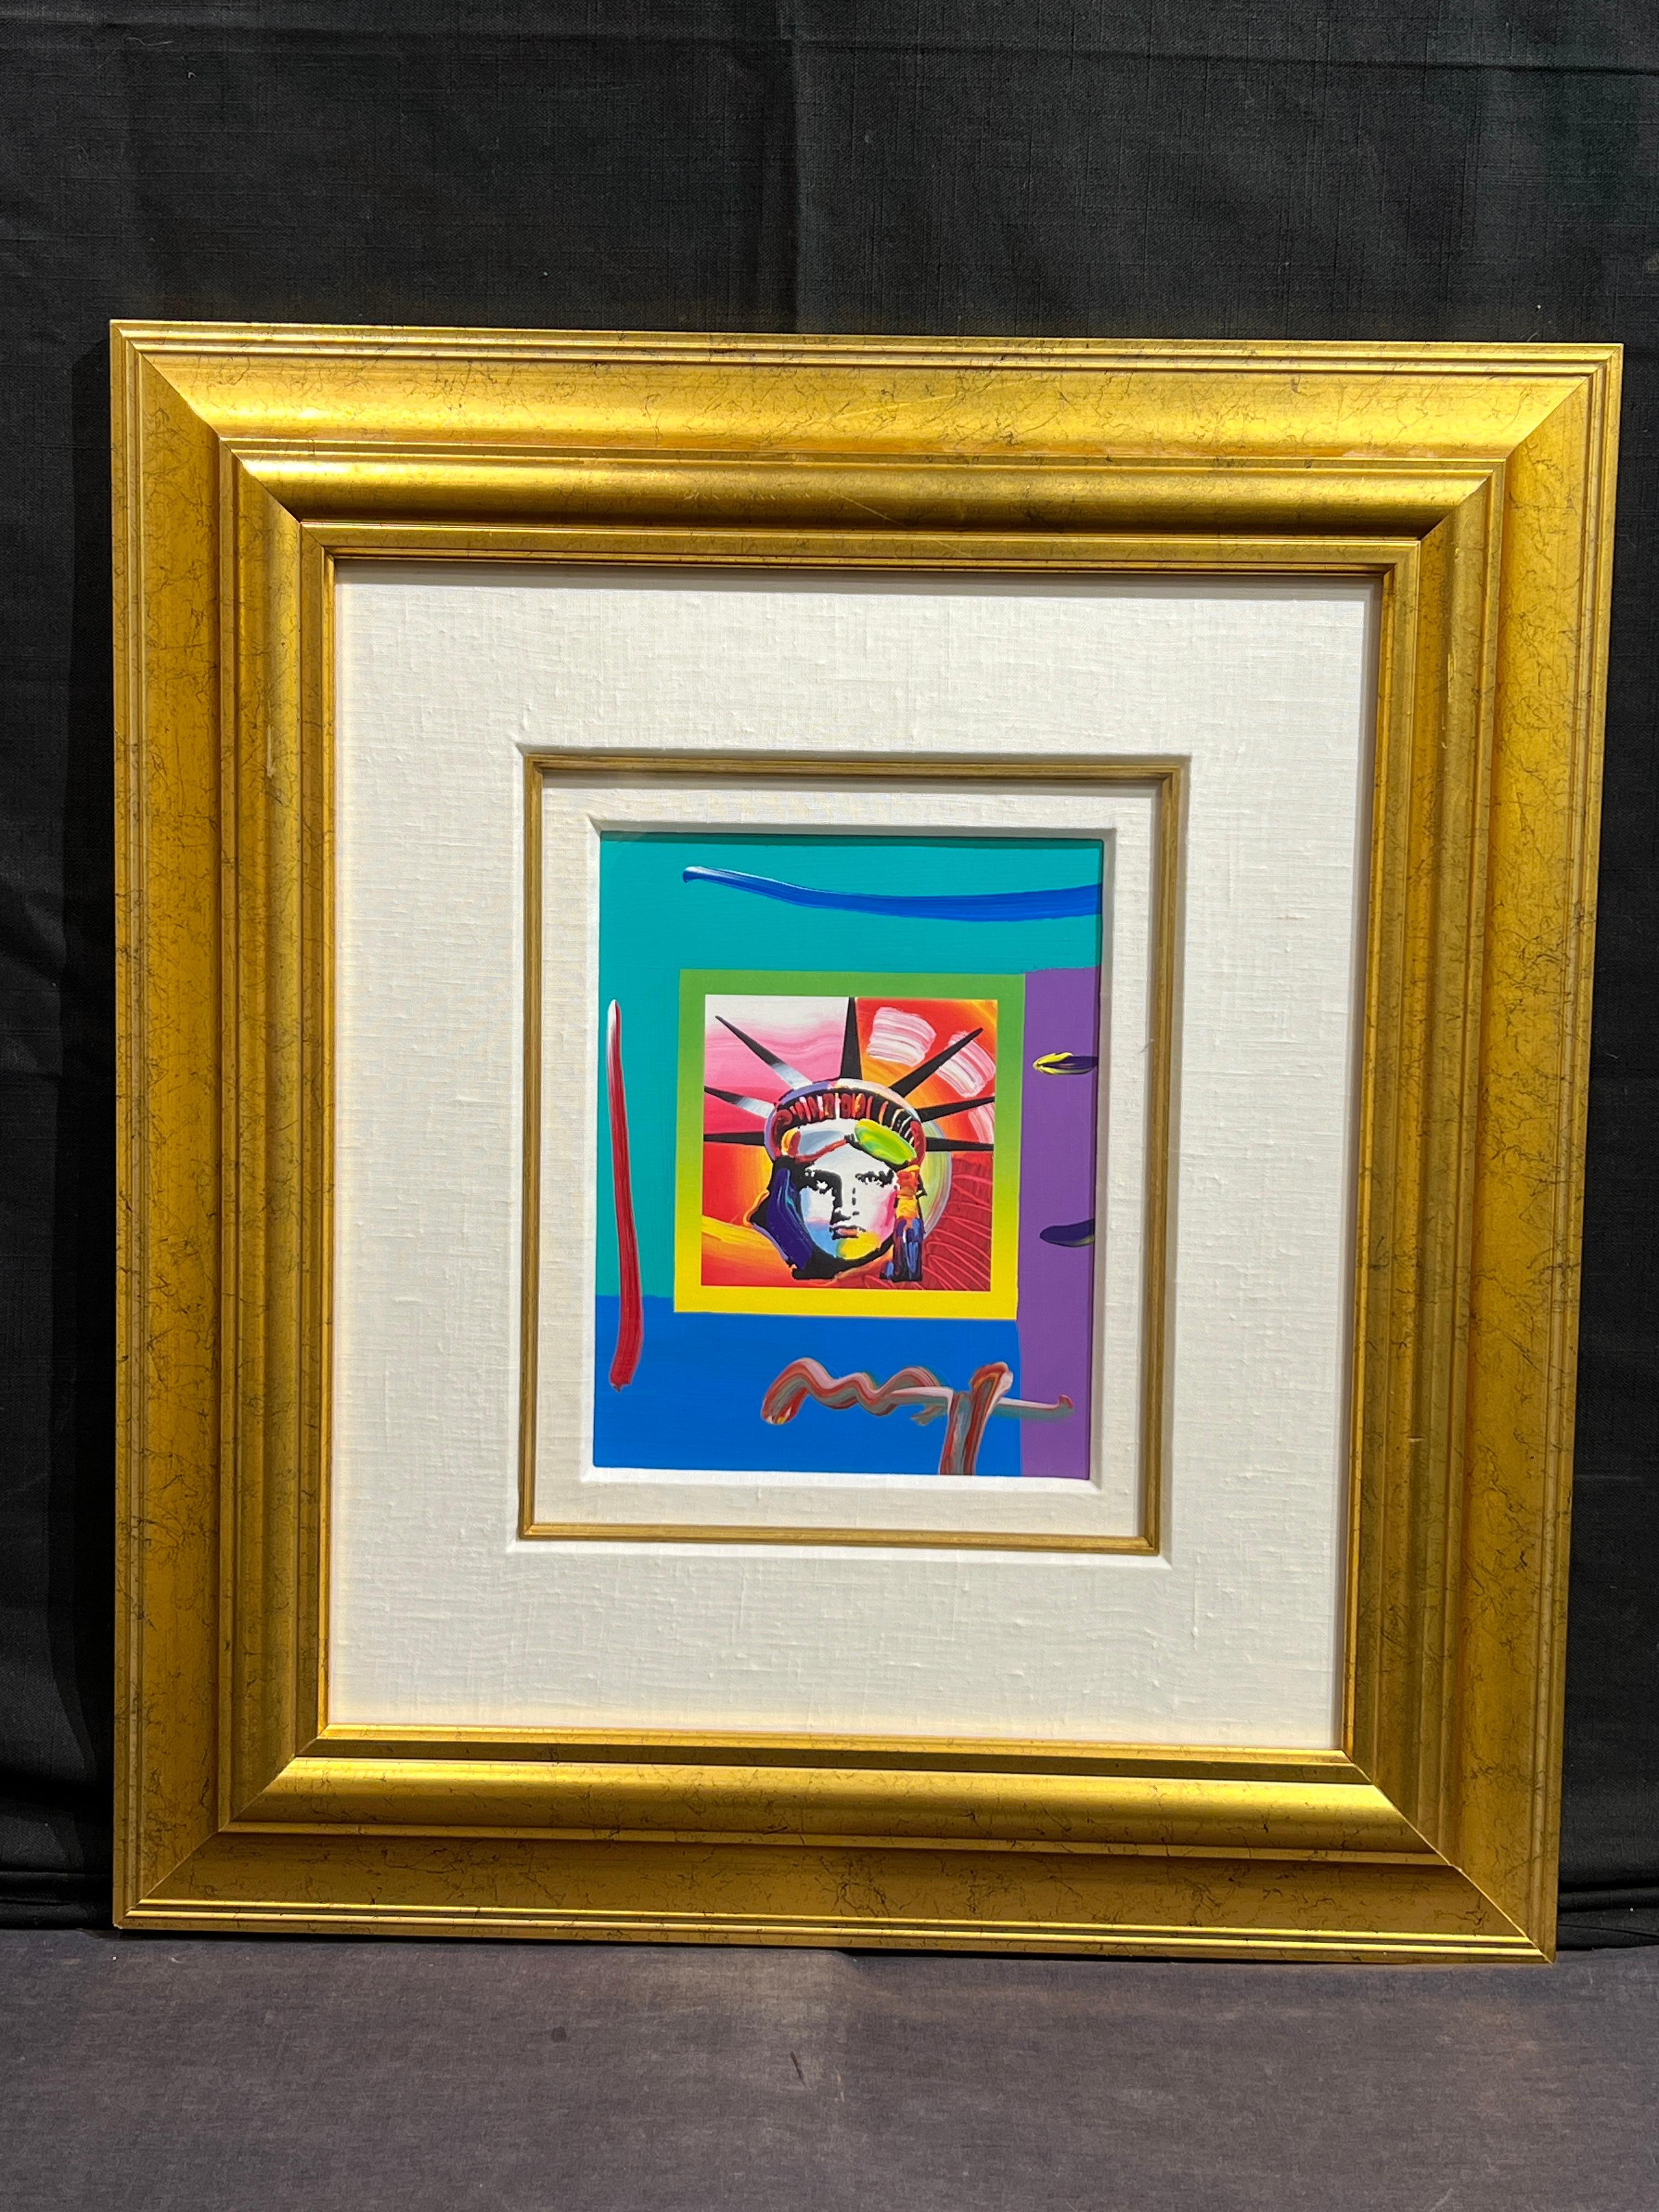 Peter Max (German, b. 1937)
Liberty Head II
Signed Lower Right
9.5 x 7.25 inches
23.5 x 21.5 inches with frame

Peter Max, born Peter Max Finkelstein,  is a multi-dimensional artist focused on contemporary events.  When he left art school in the